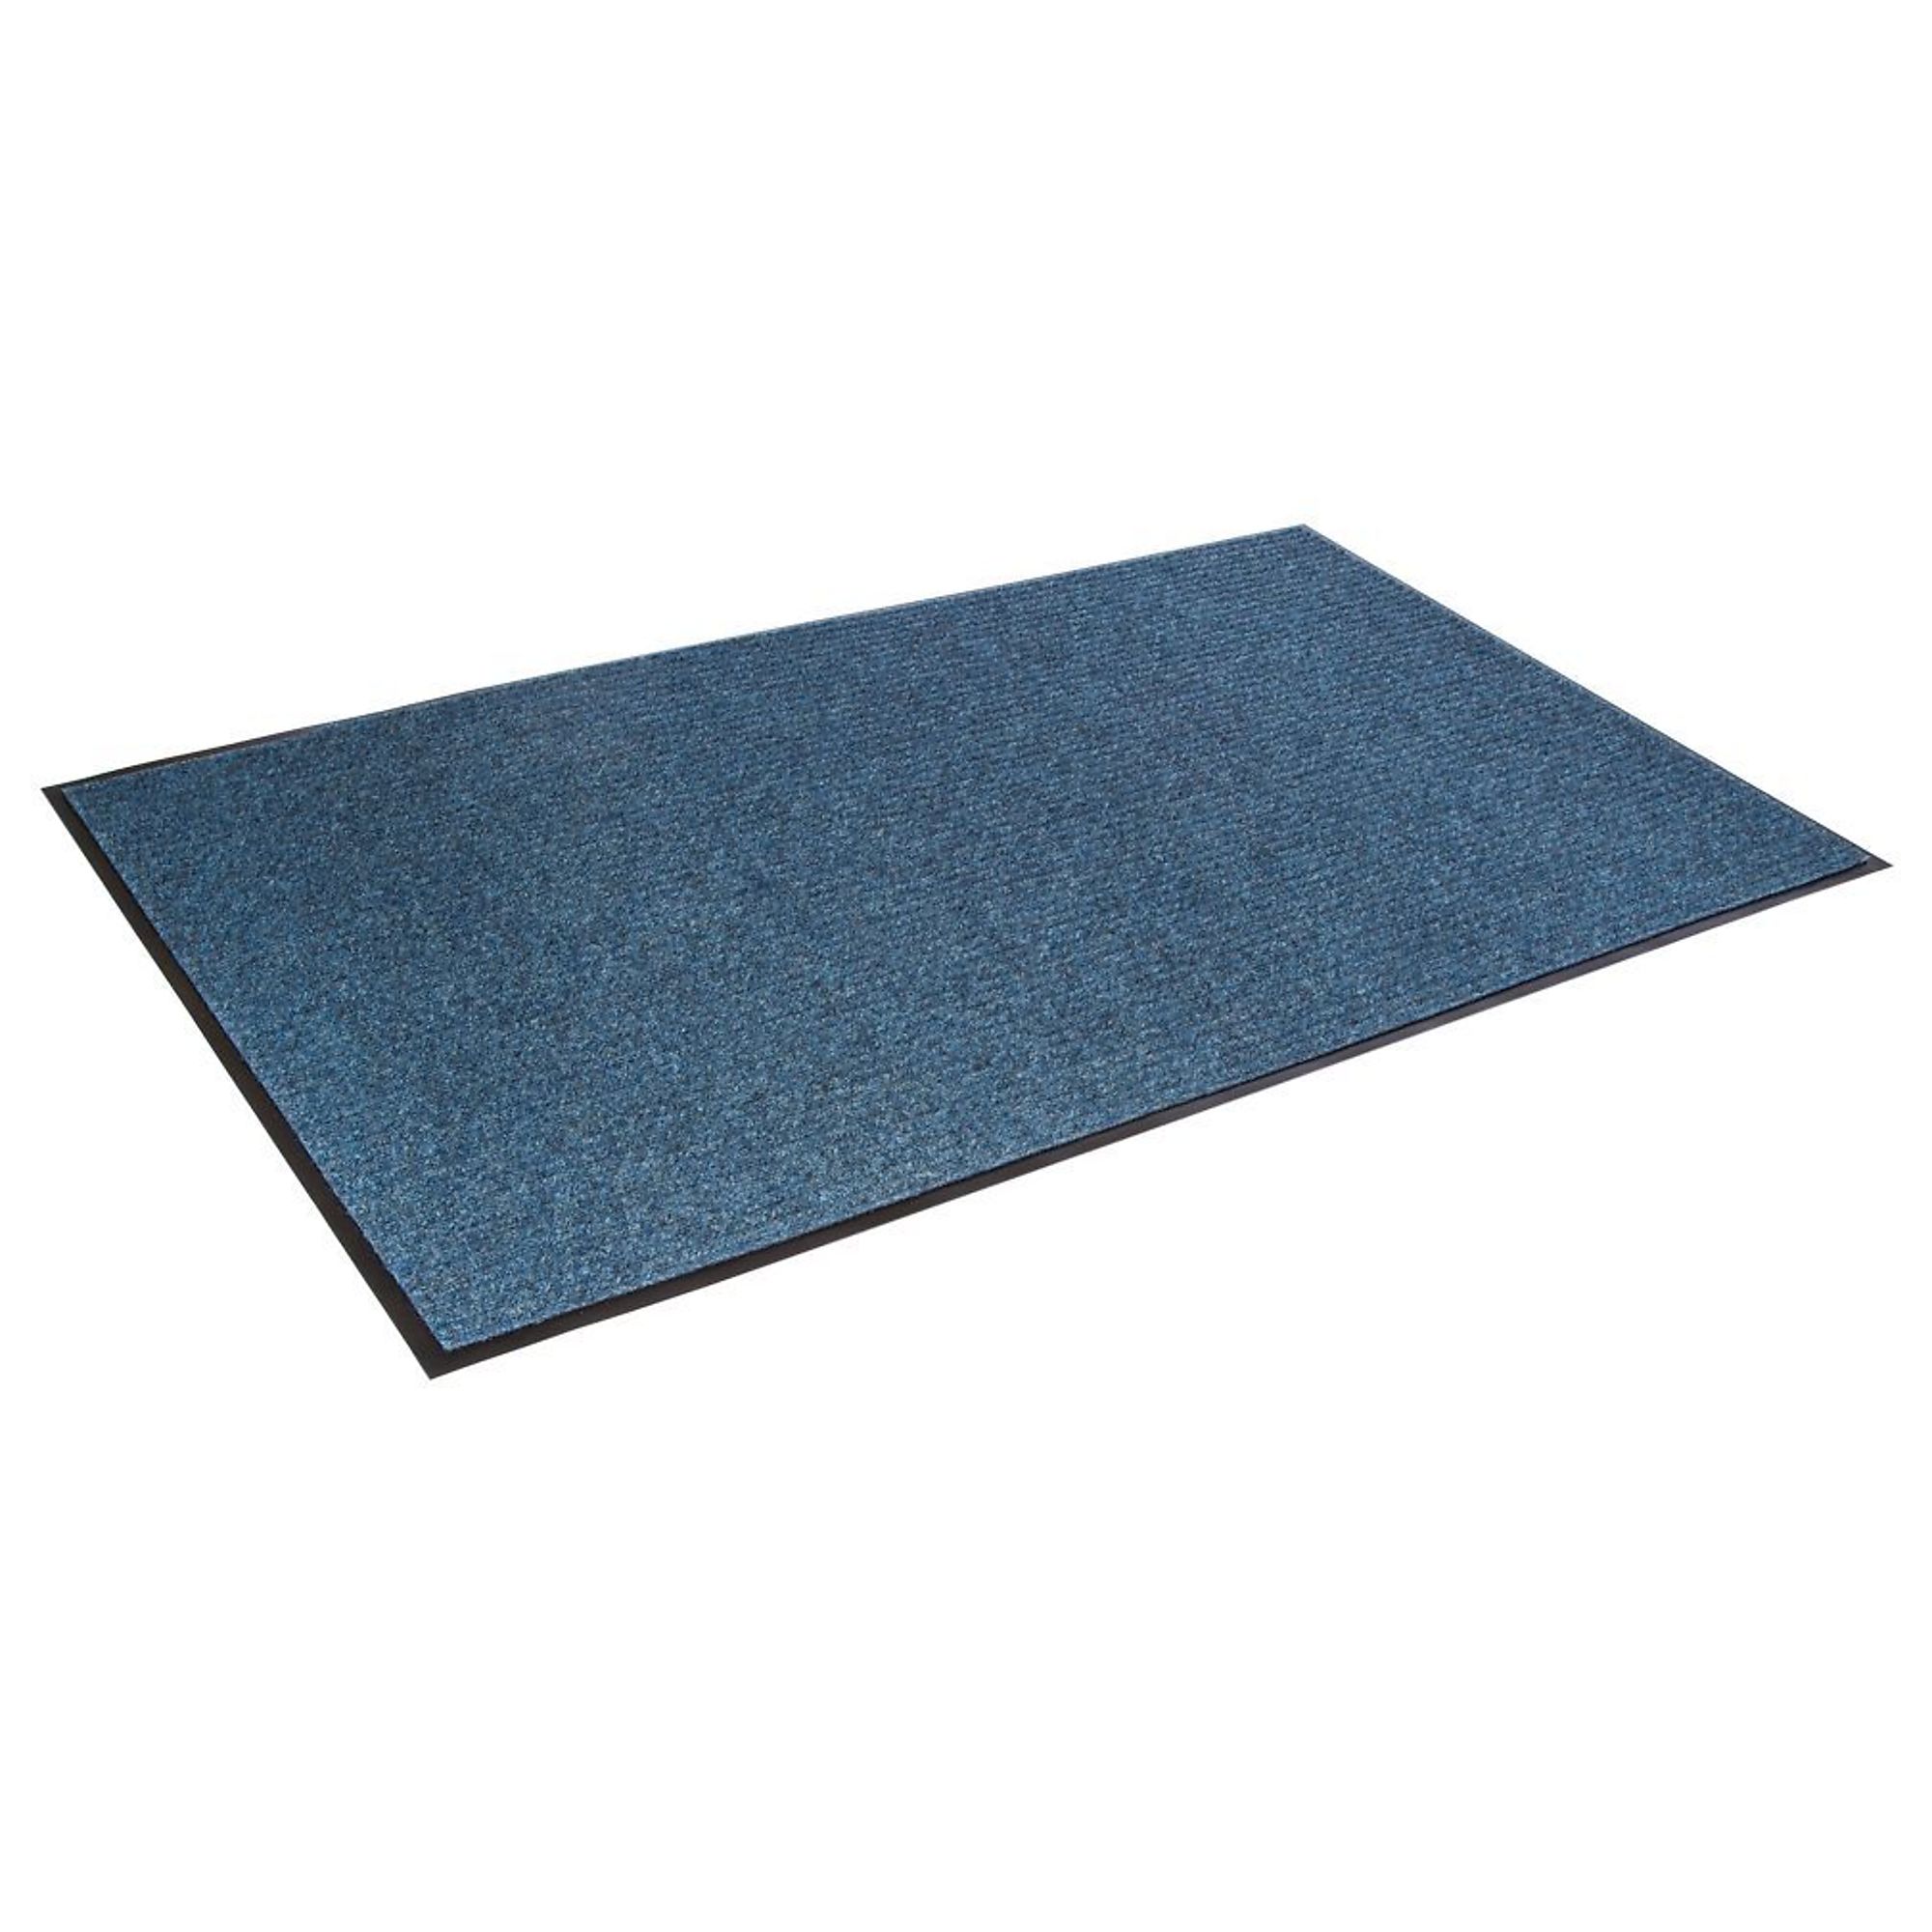 Crown Matting Technologies, Needle-Rib 4ft.x6ft. Blue, Width 48 in, Length 72 in, Thickness 5/16 in, Model NR 0046BL